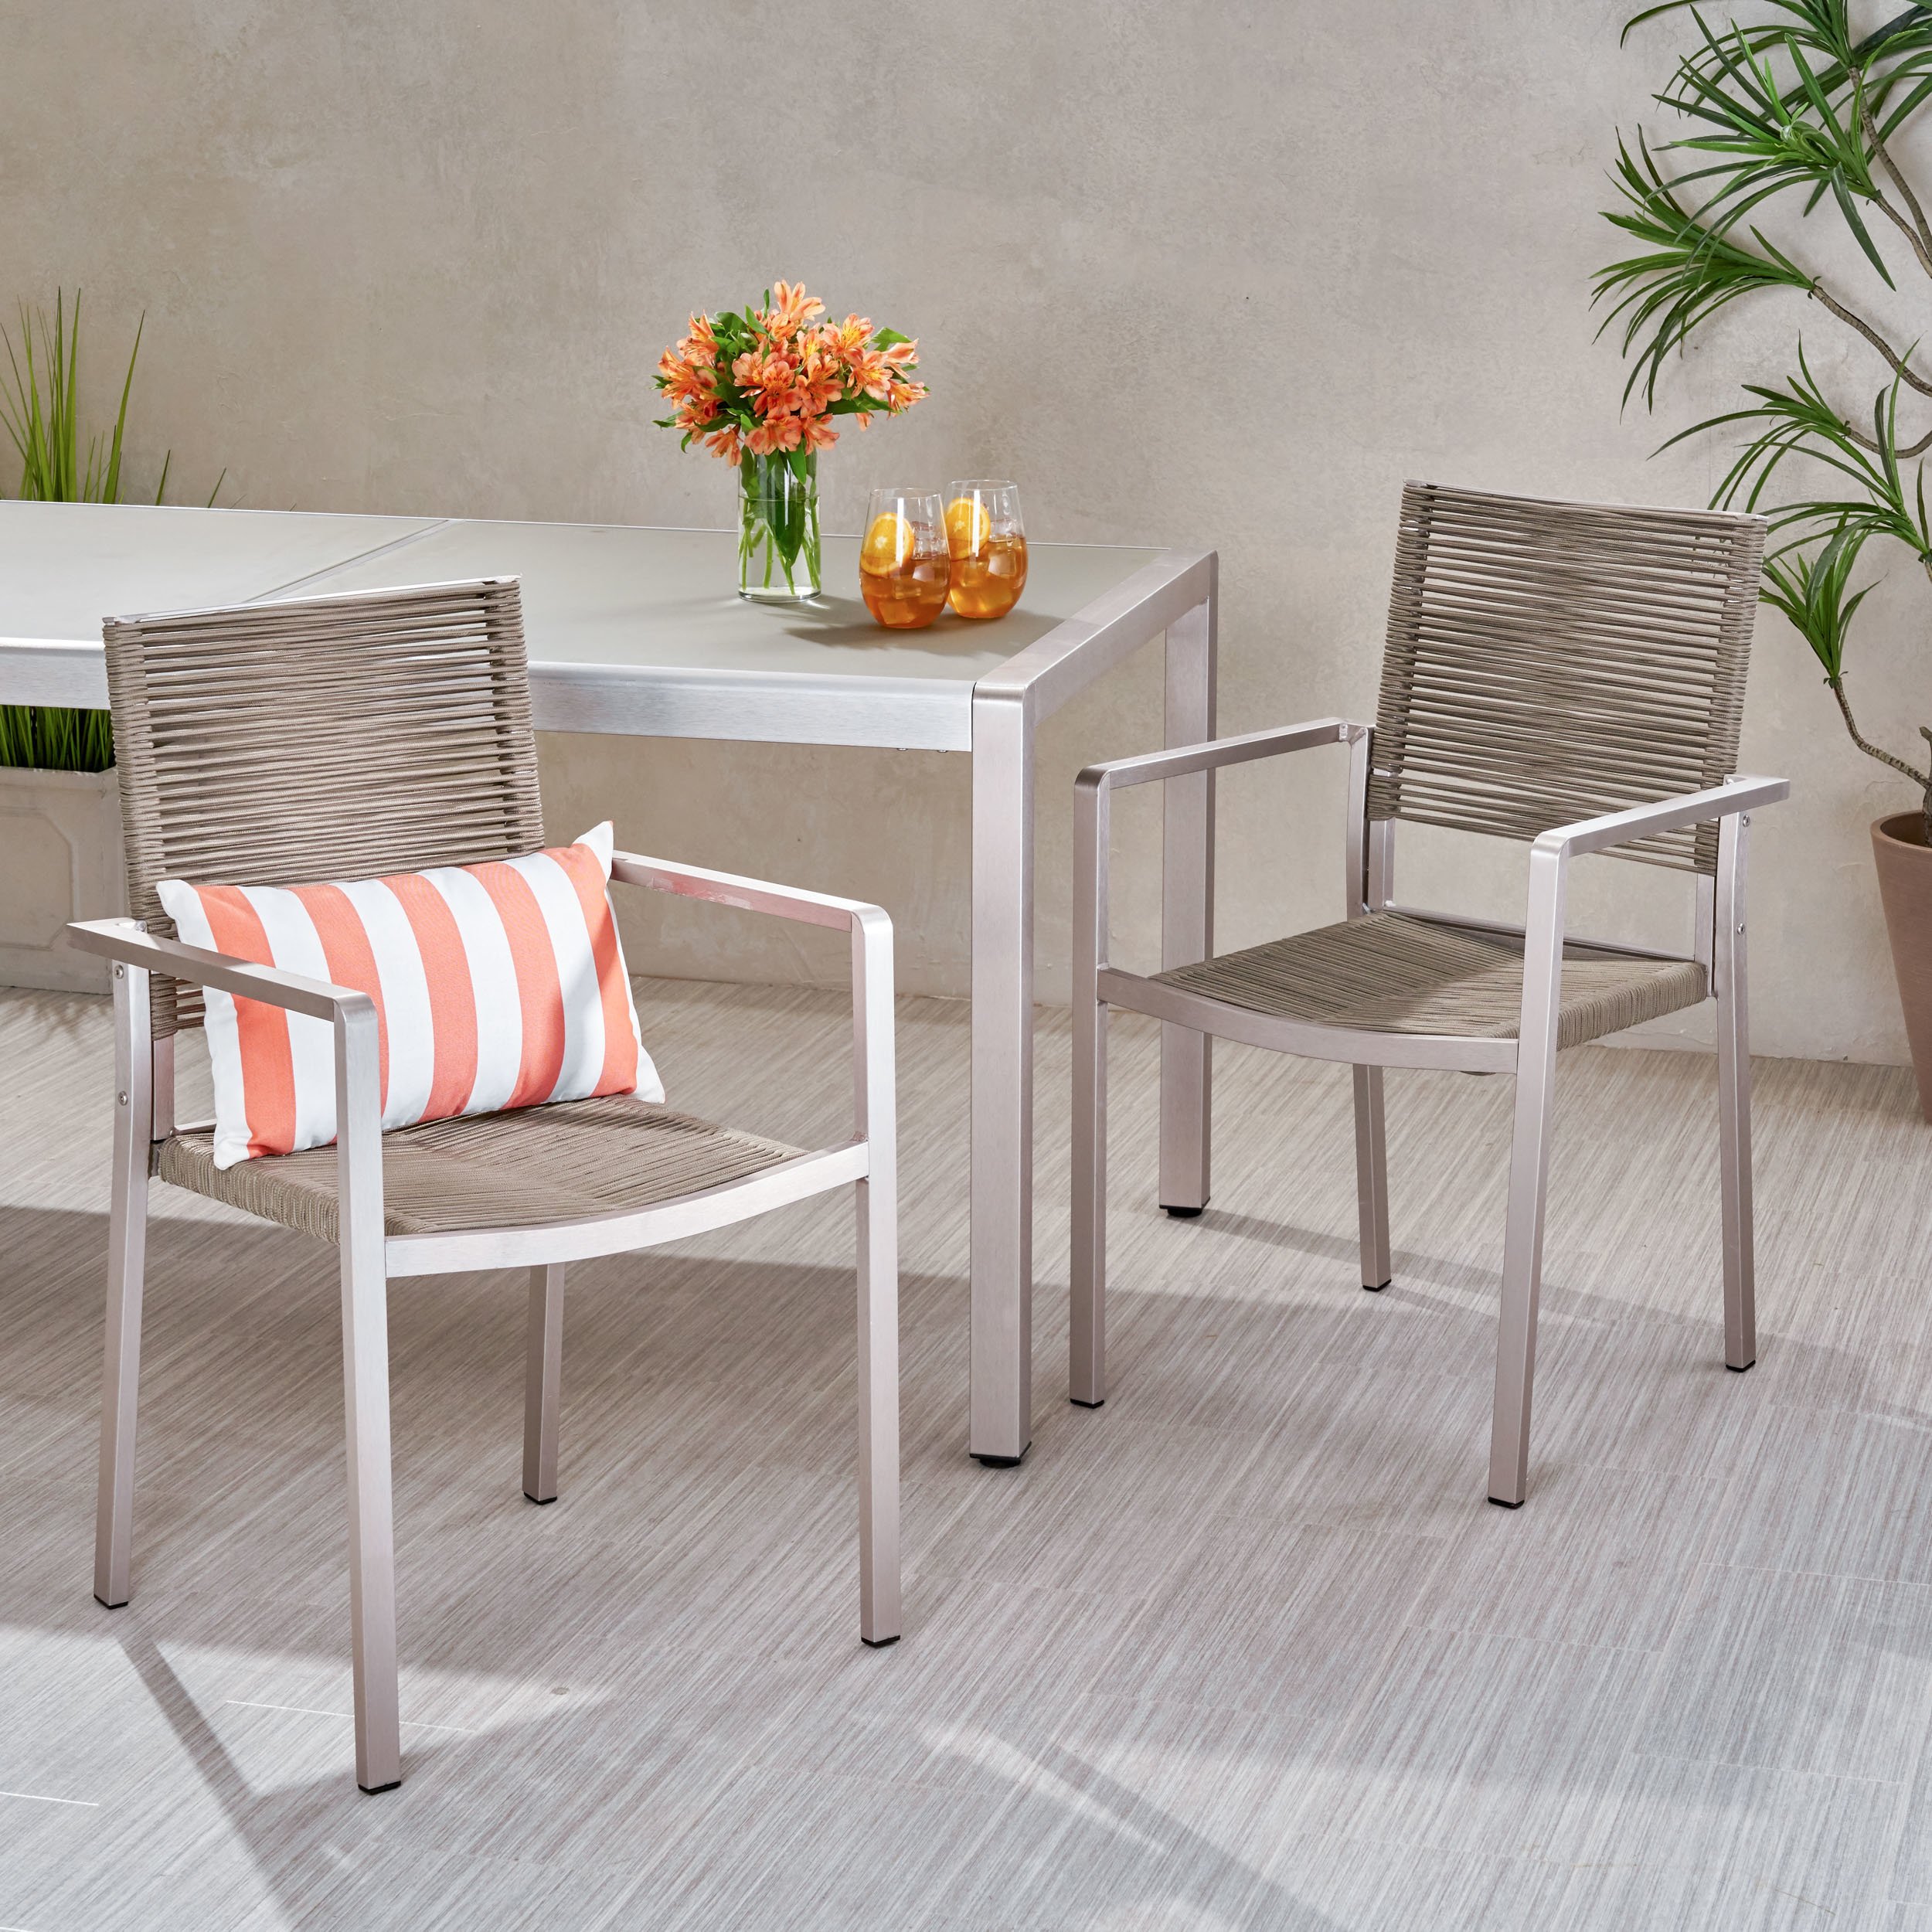 Jean Outdoor Modern Aluminum Dining Chair With Rope Seat (Set Of 2) - Silver + Taupe